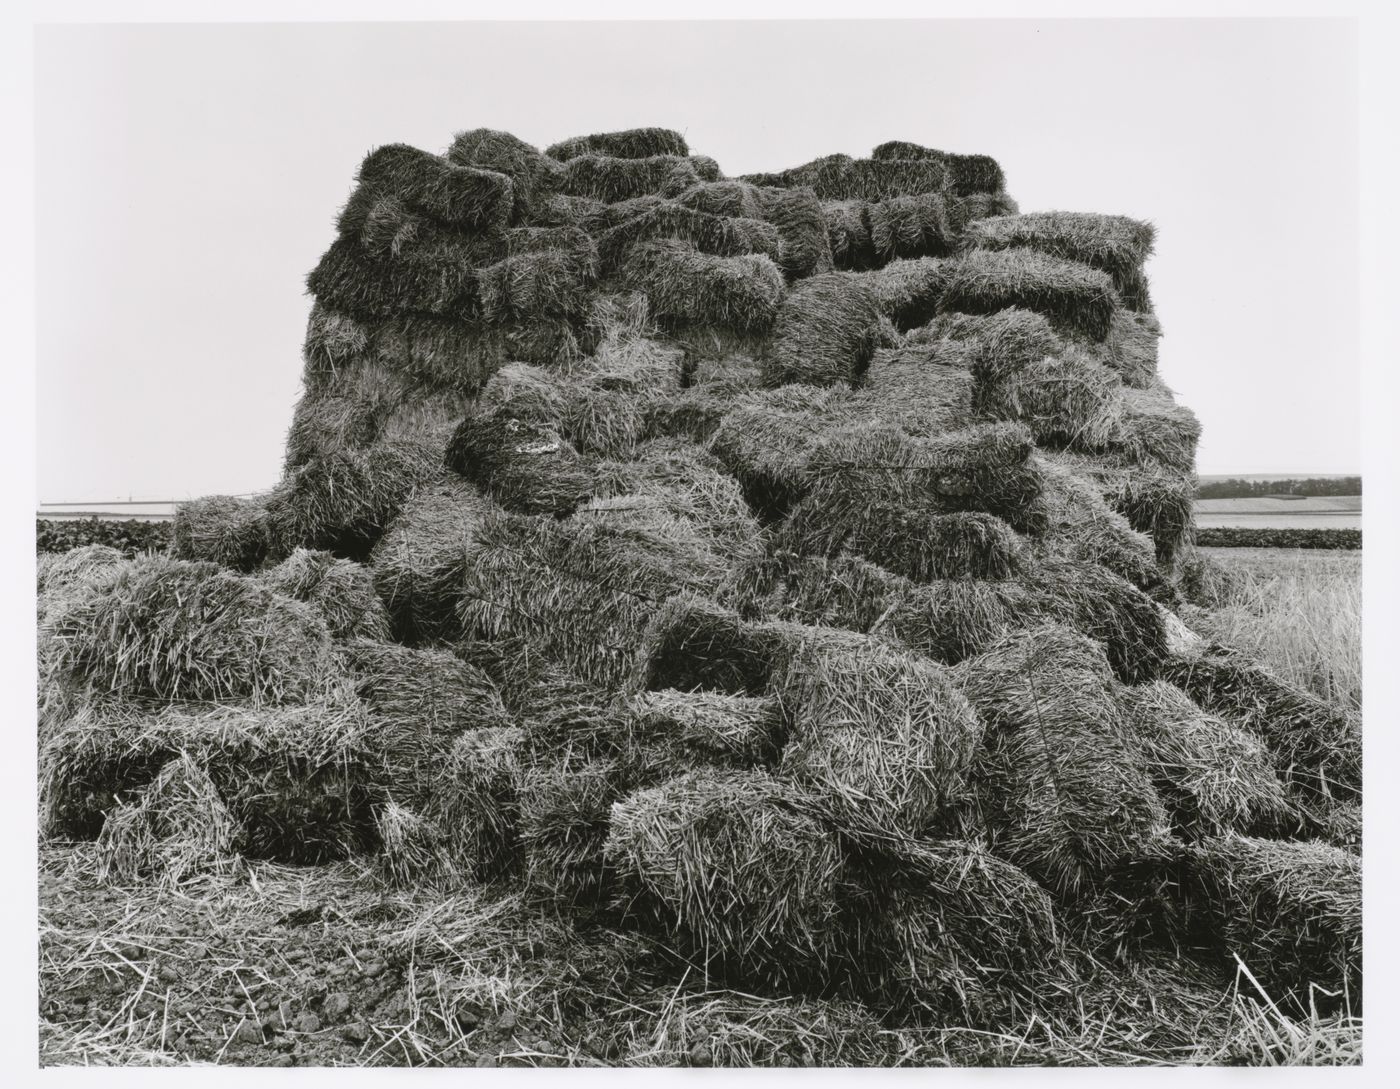 View of loosely piled bales of straw, Mainz, Germany